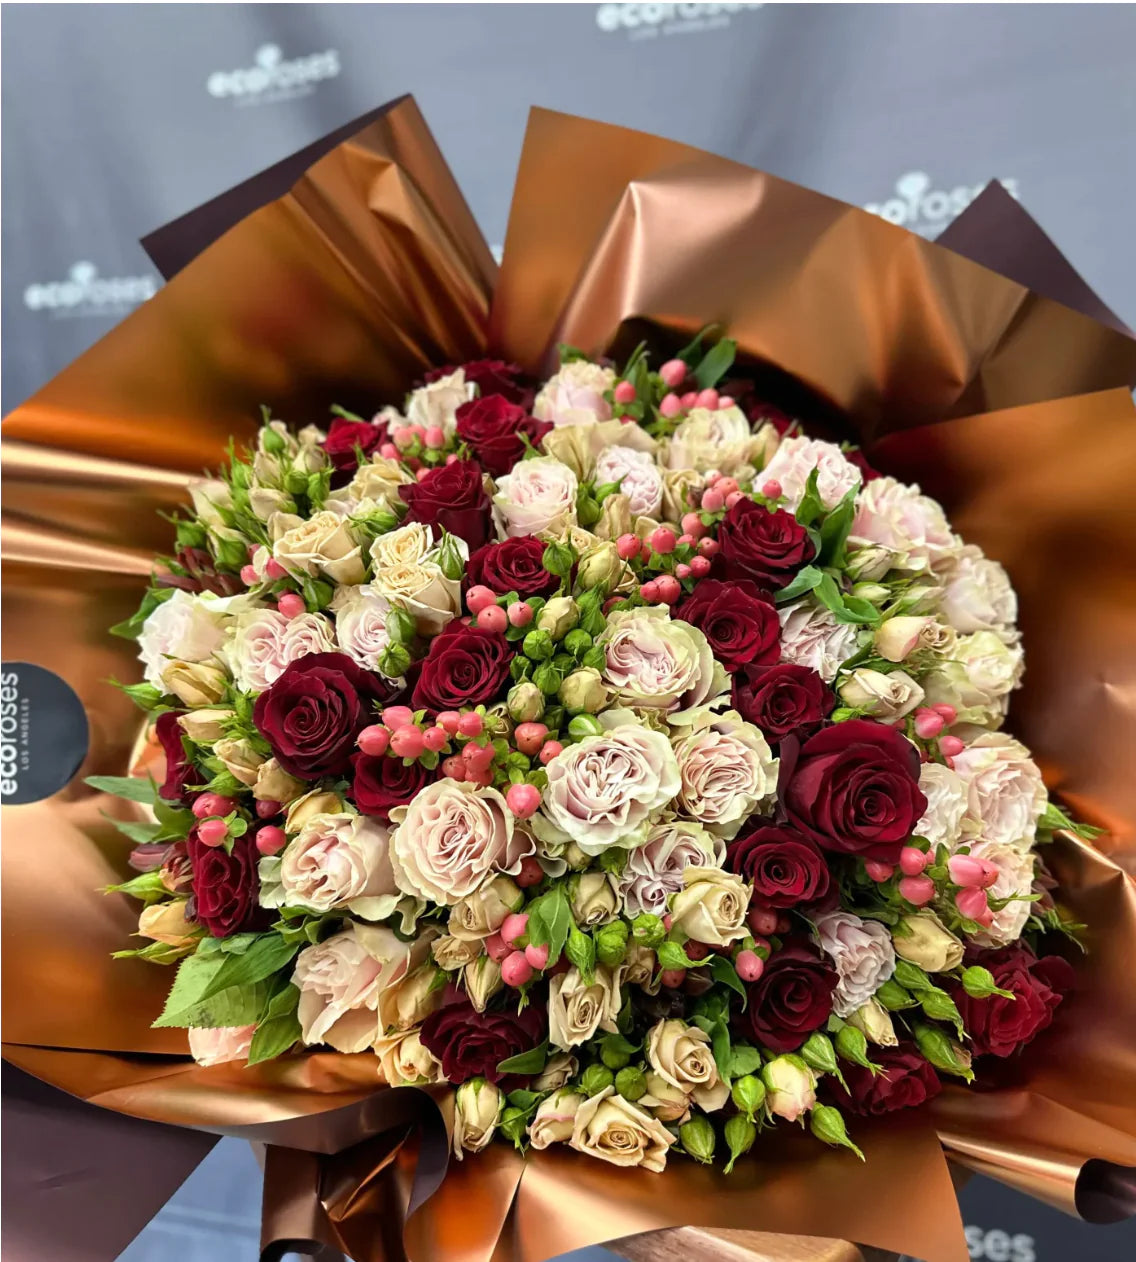 Bouquet called FiresideLove showcasing a warm, inviting arrangement of blooms Flowers Glendale California